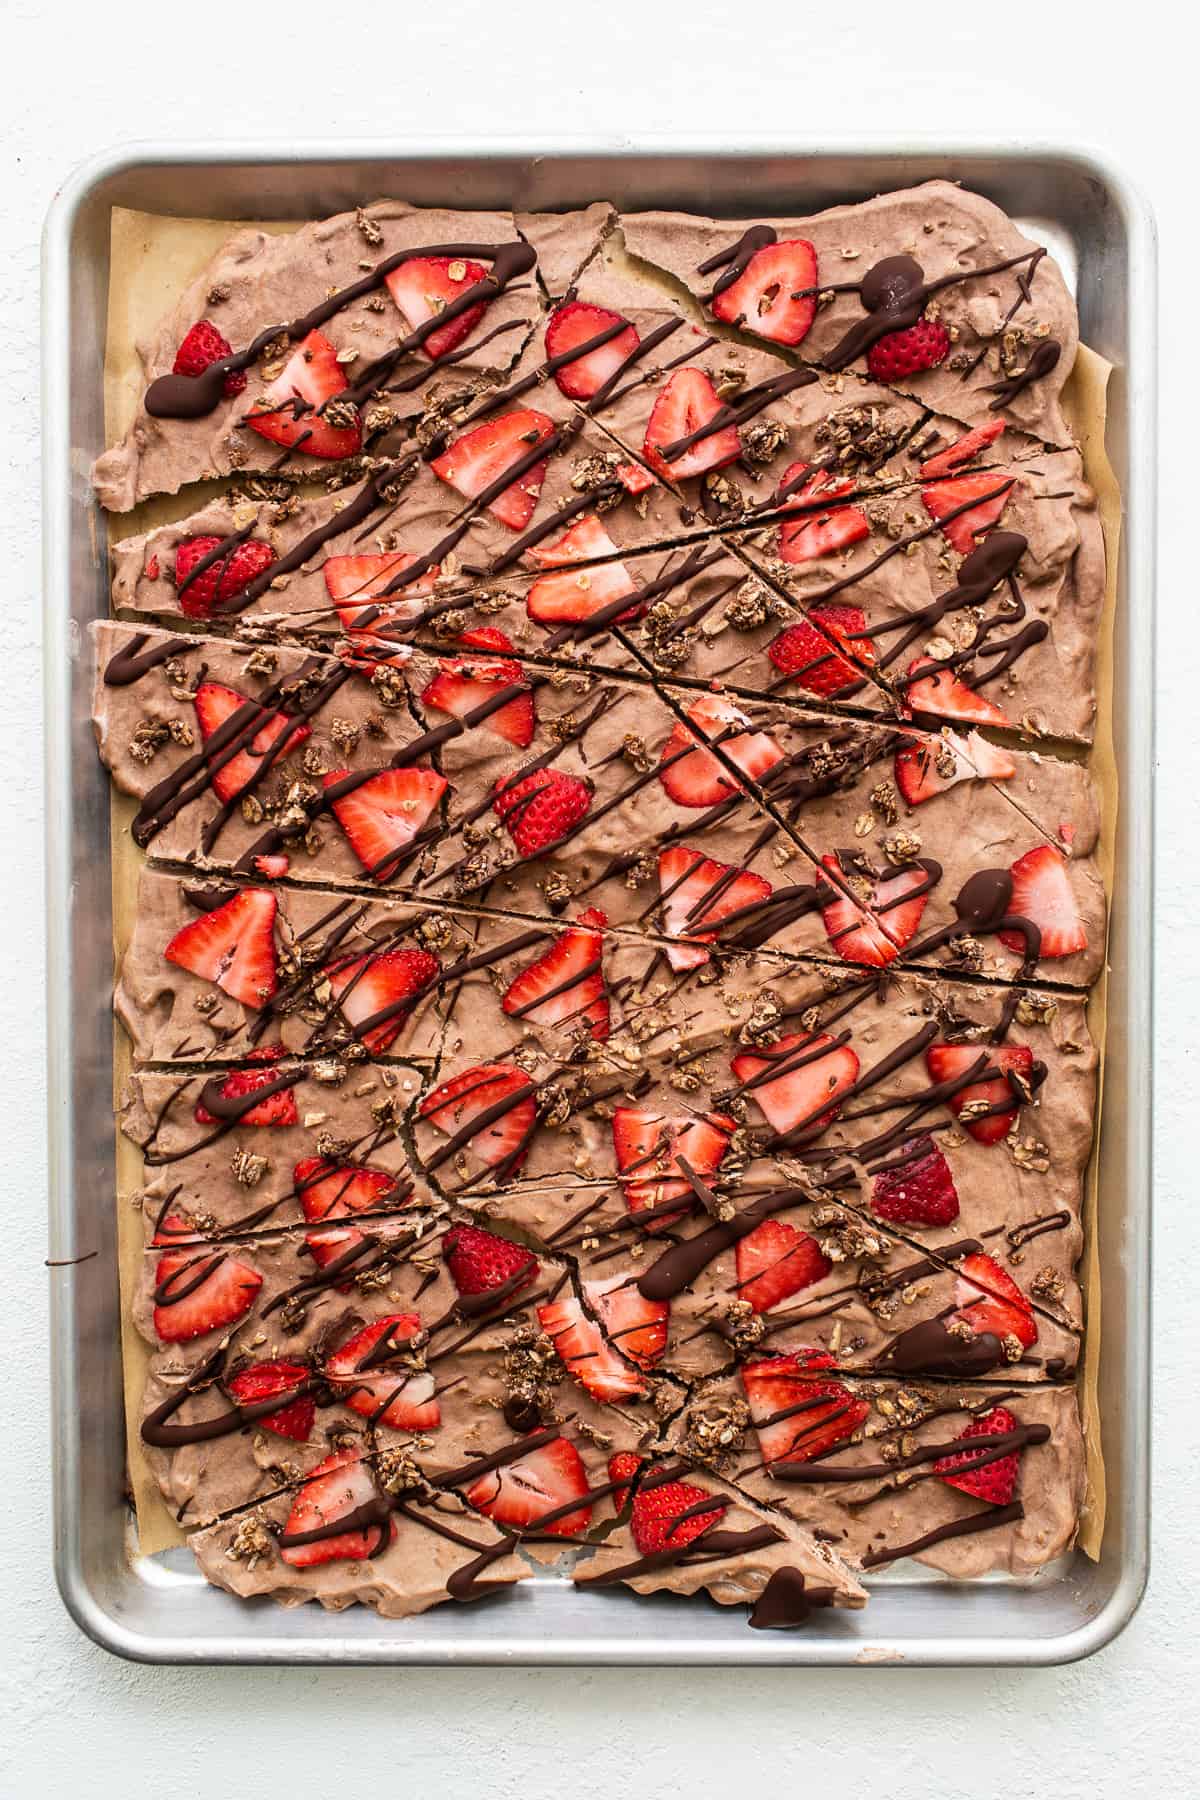 Frozen yogurt bark. topped with strawberries and drizzled with chocolate.